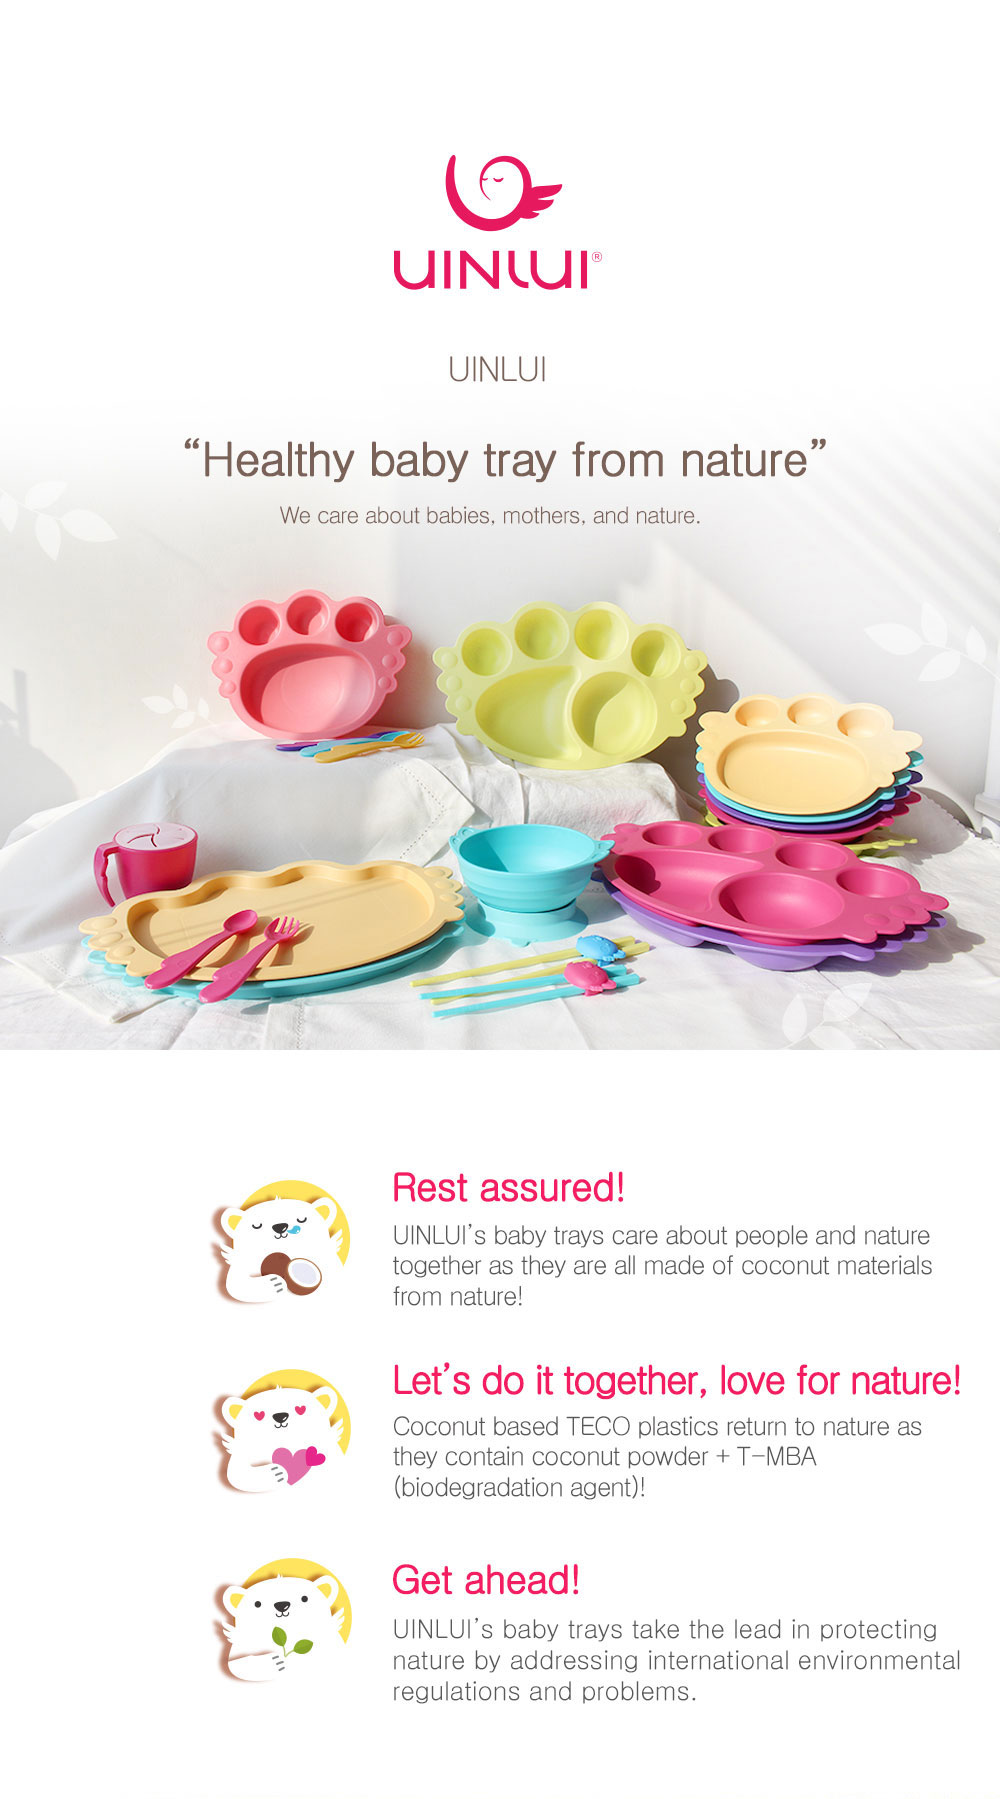 Suction Baby Angel Tray